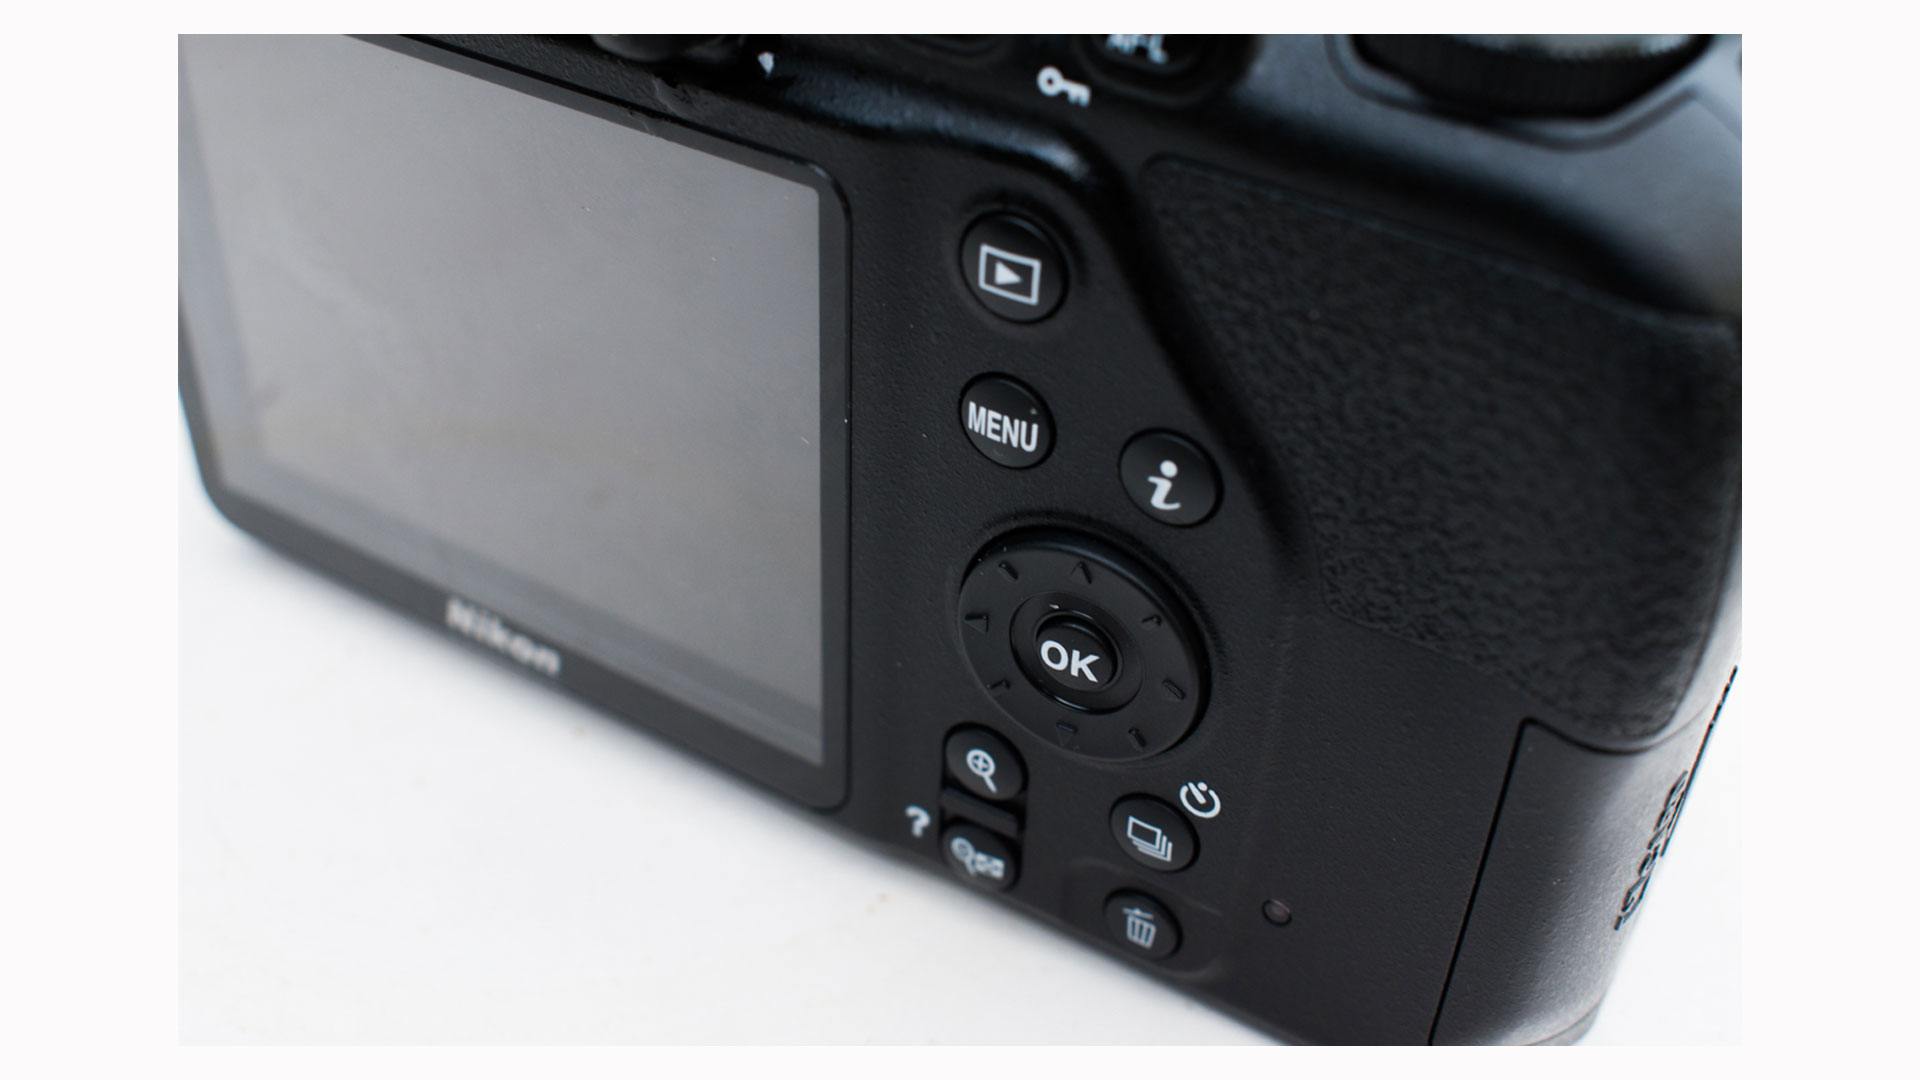 Image shows the screen on the Nikon D3500.